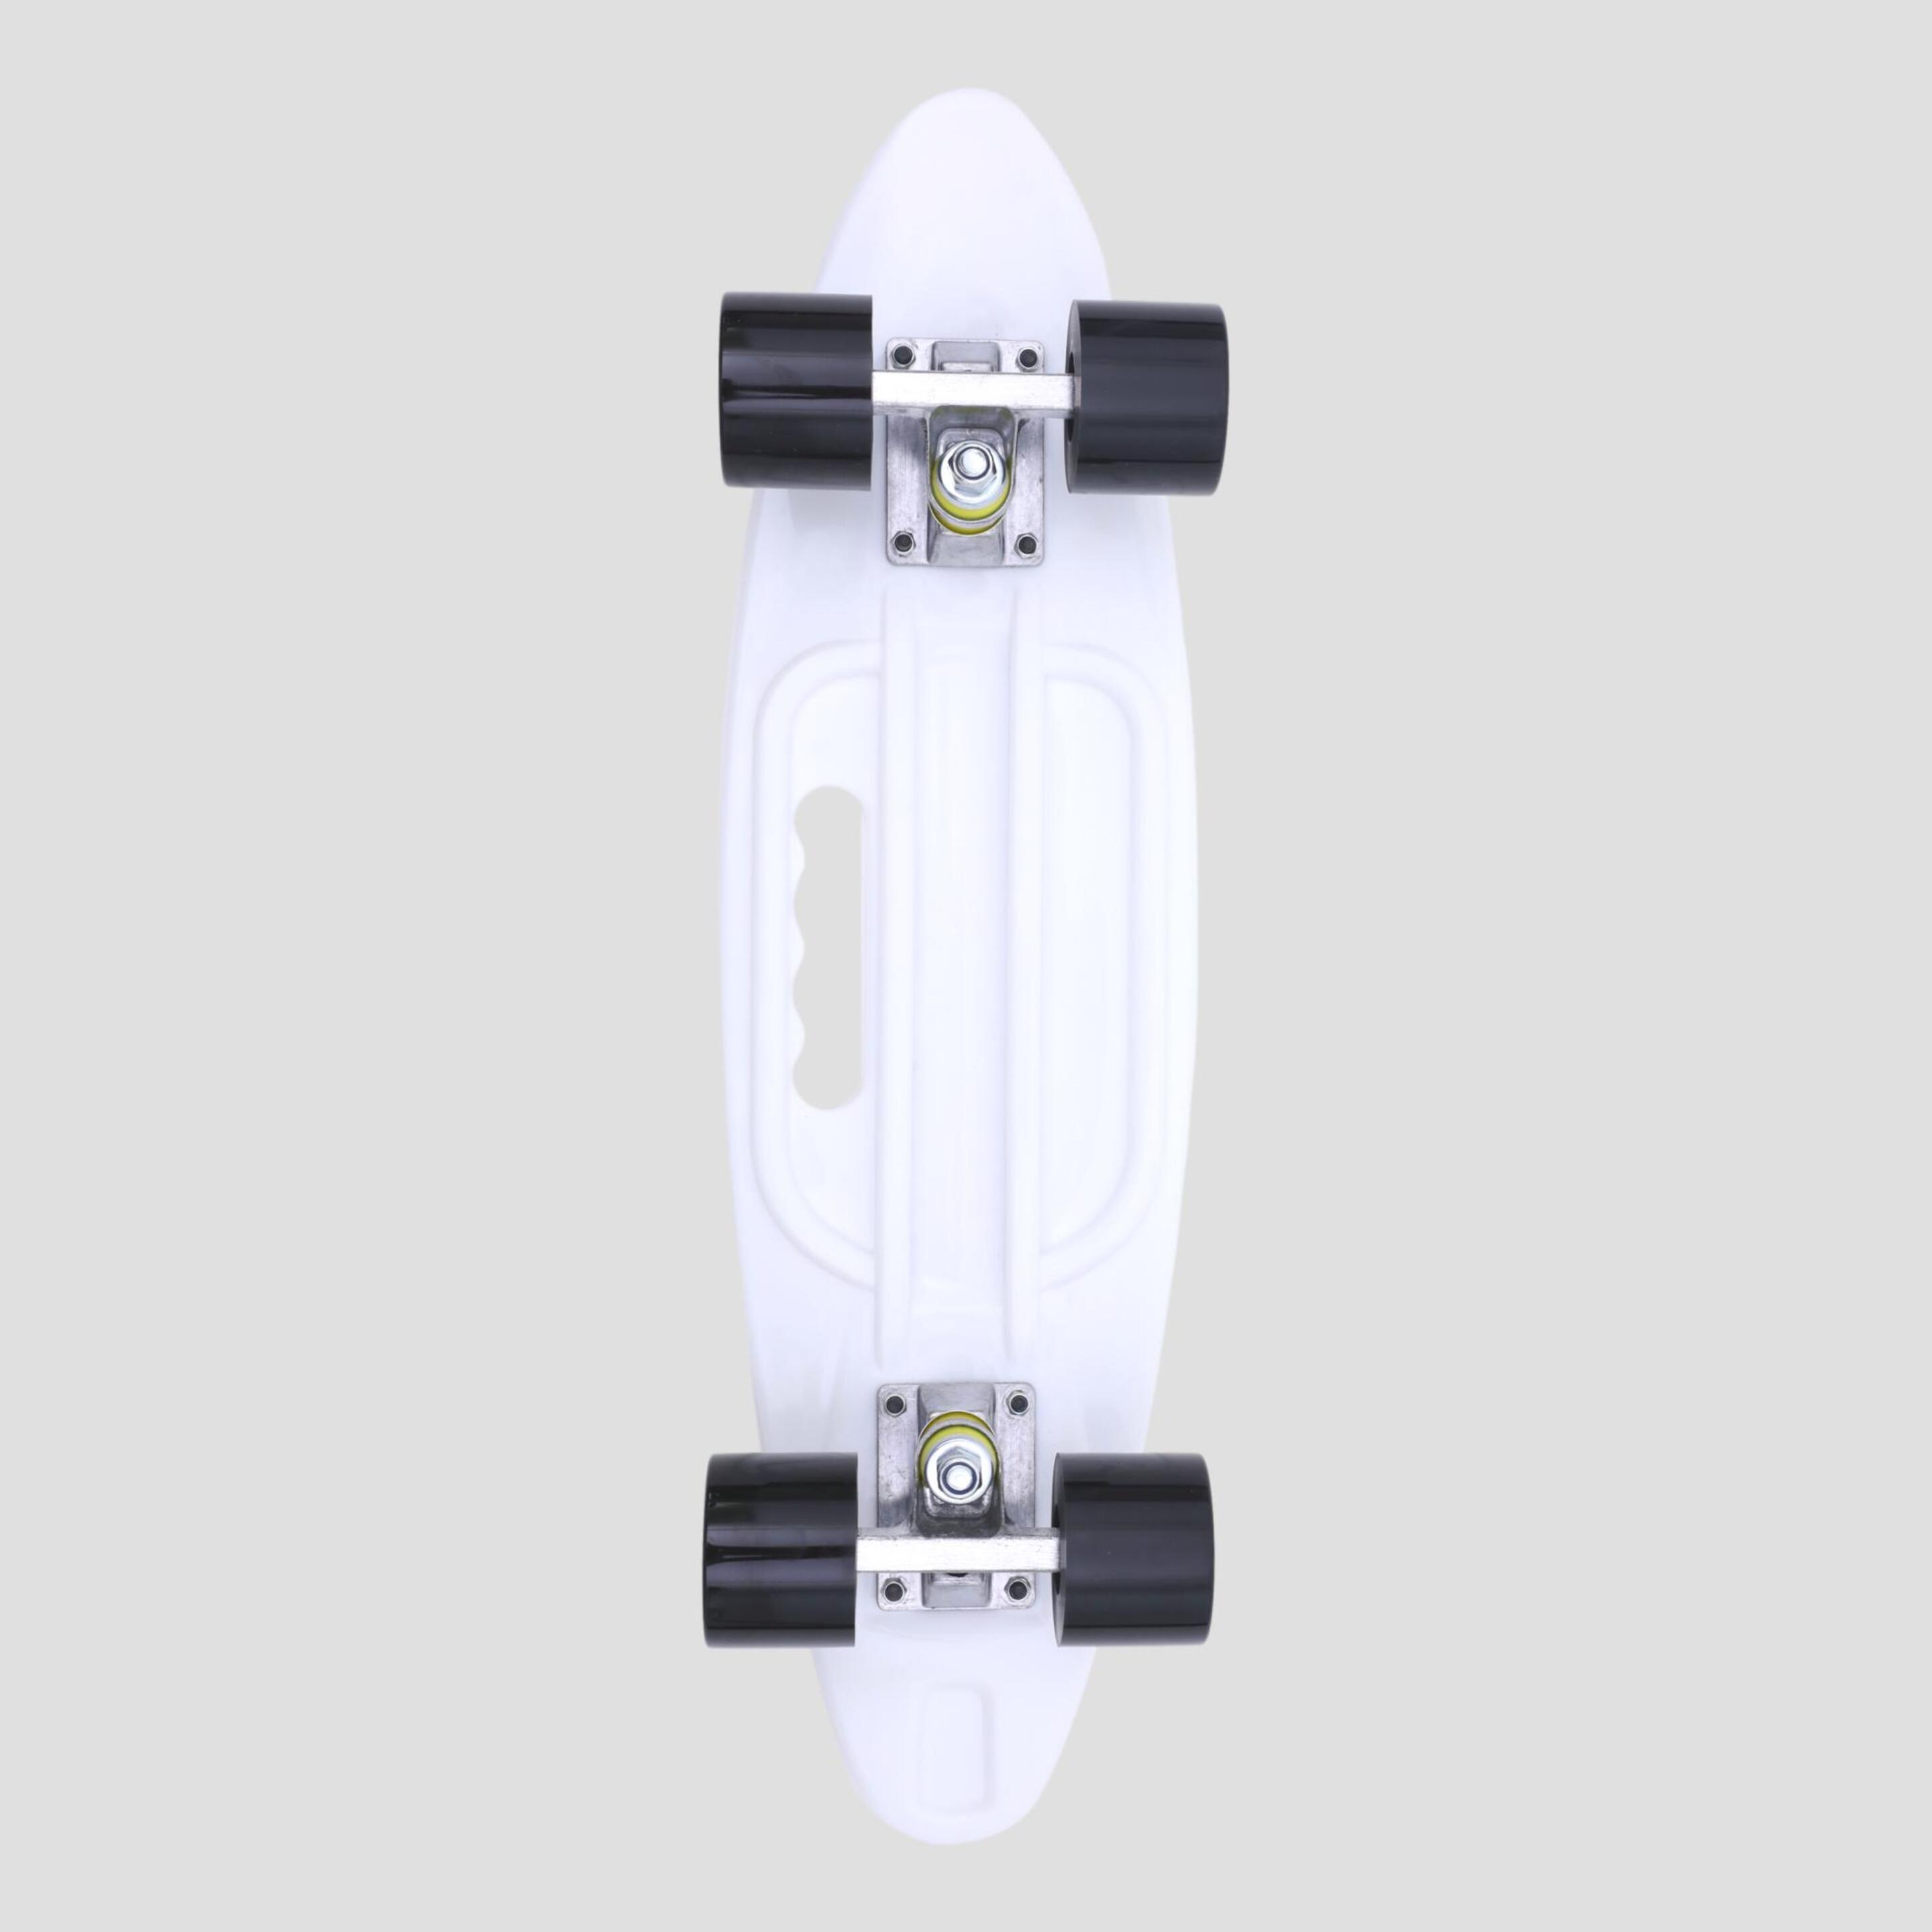 Cruiser Skate Thelongboarder Penny Picasso 23"